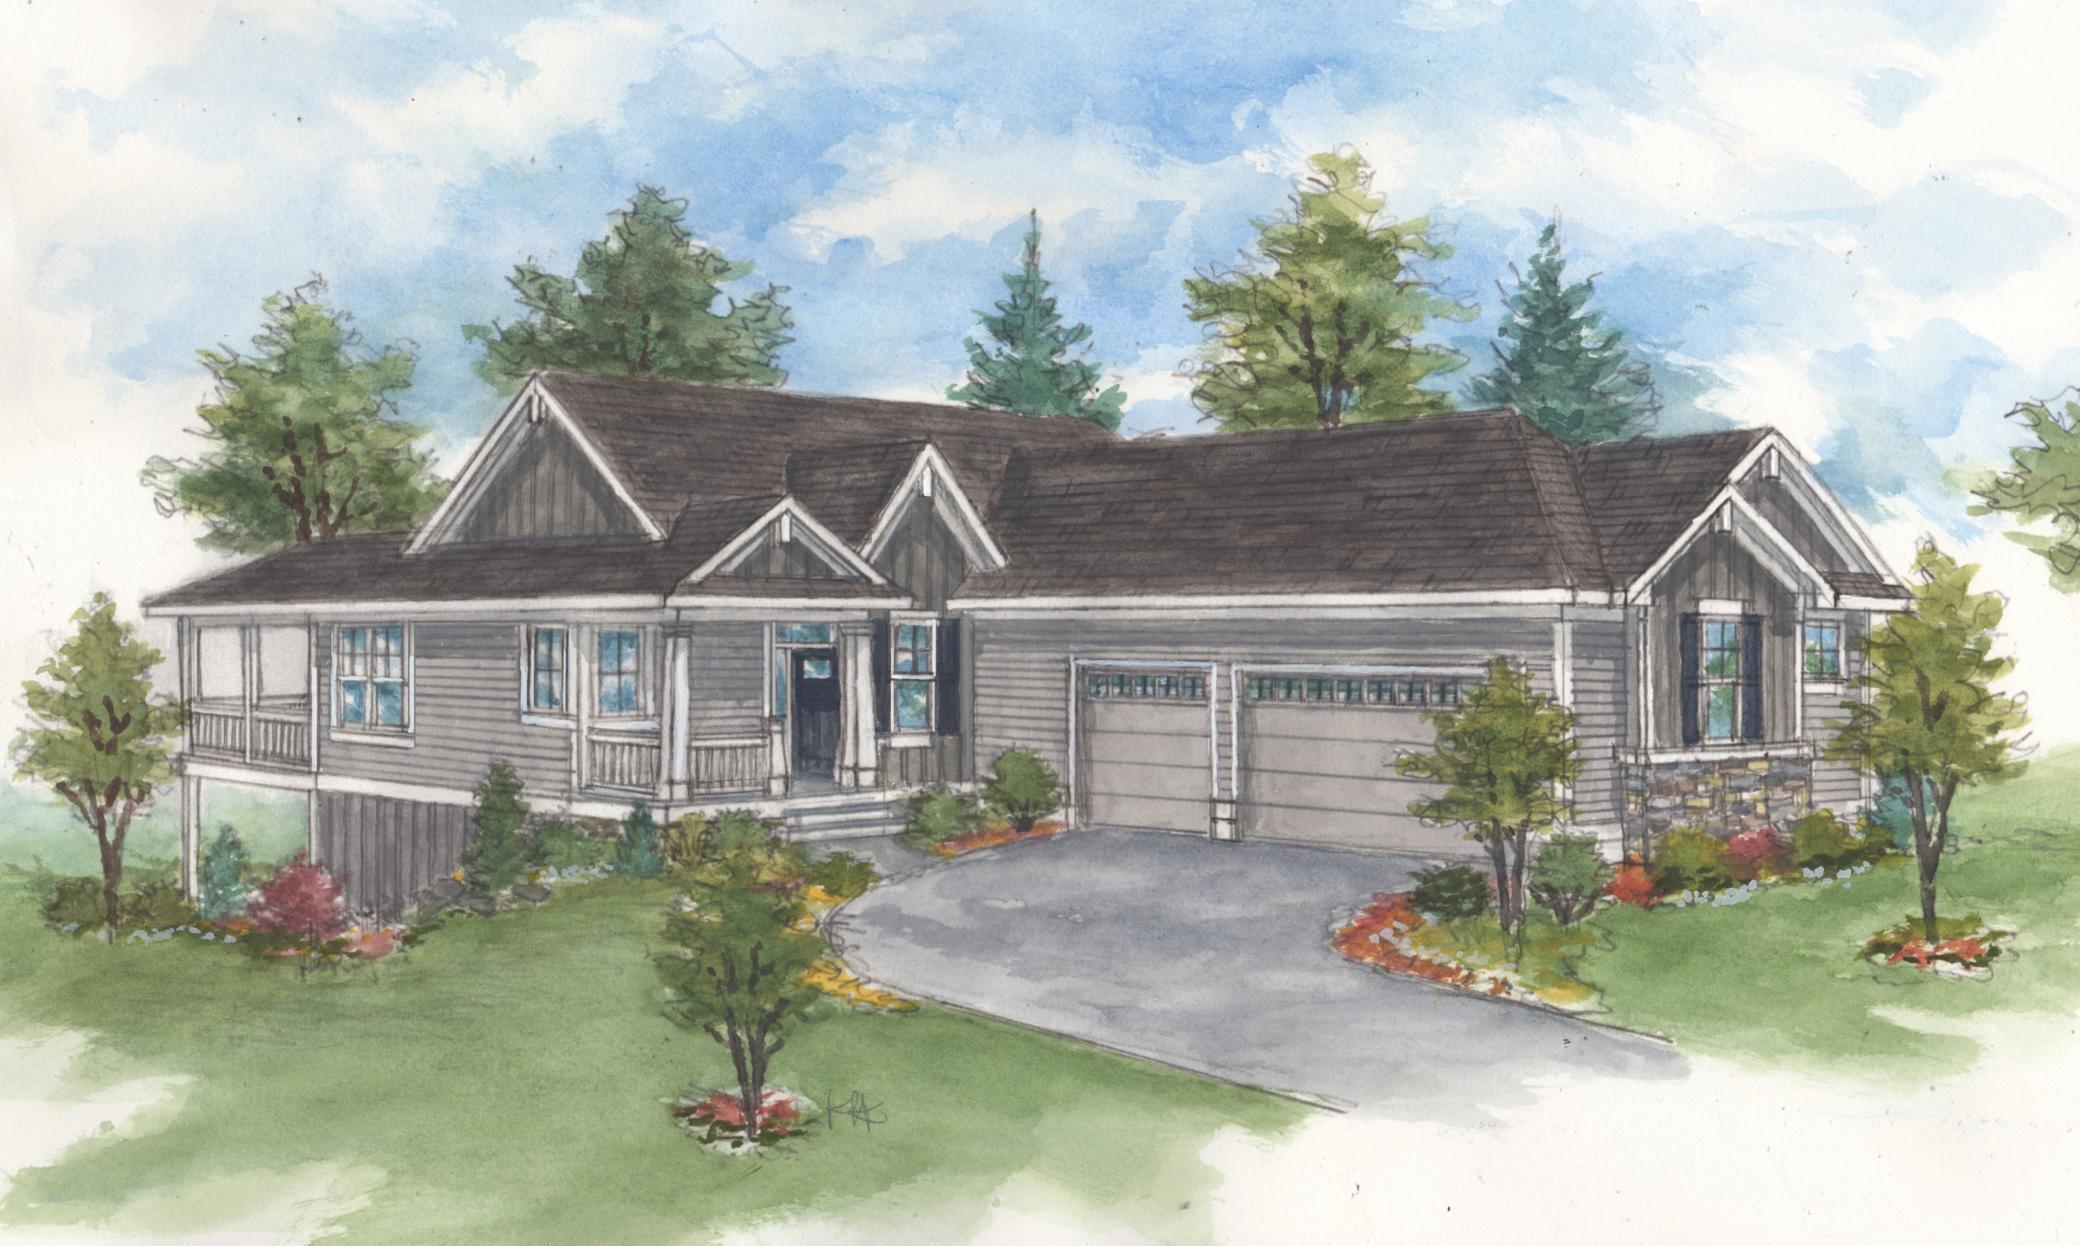 Visit the model at 4857 Sunflower Bay / Proposed-BE-BUILT Magnolia floor plan